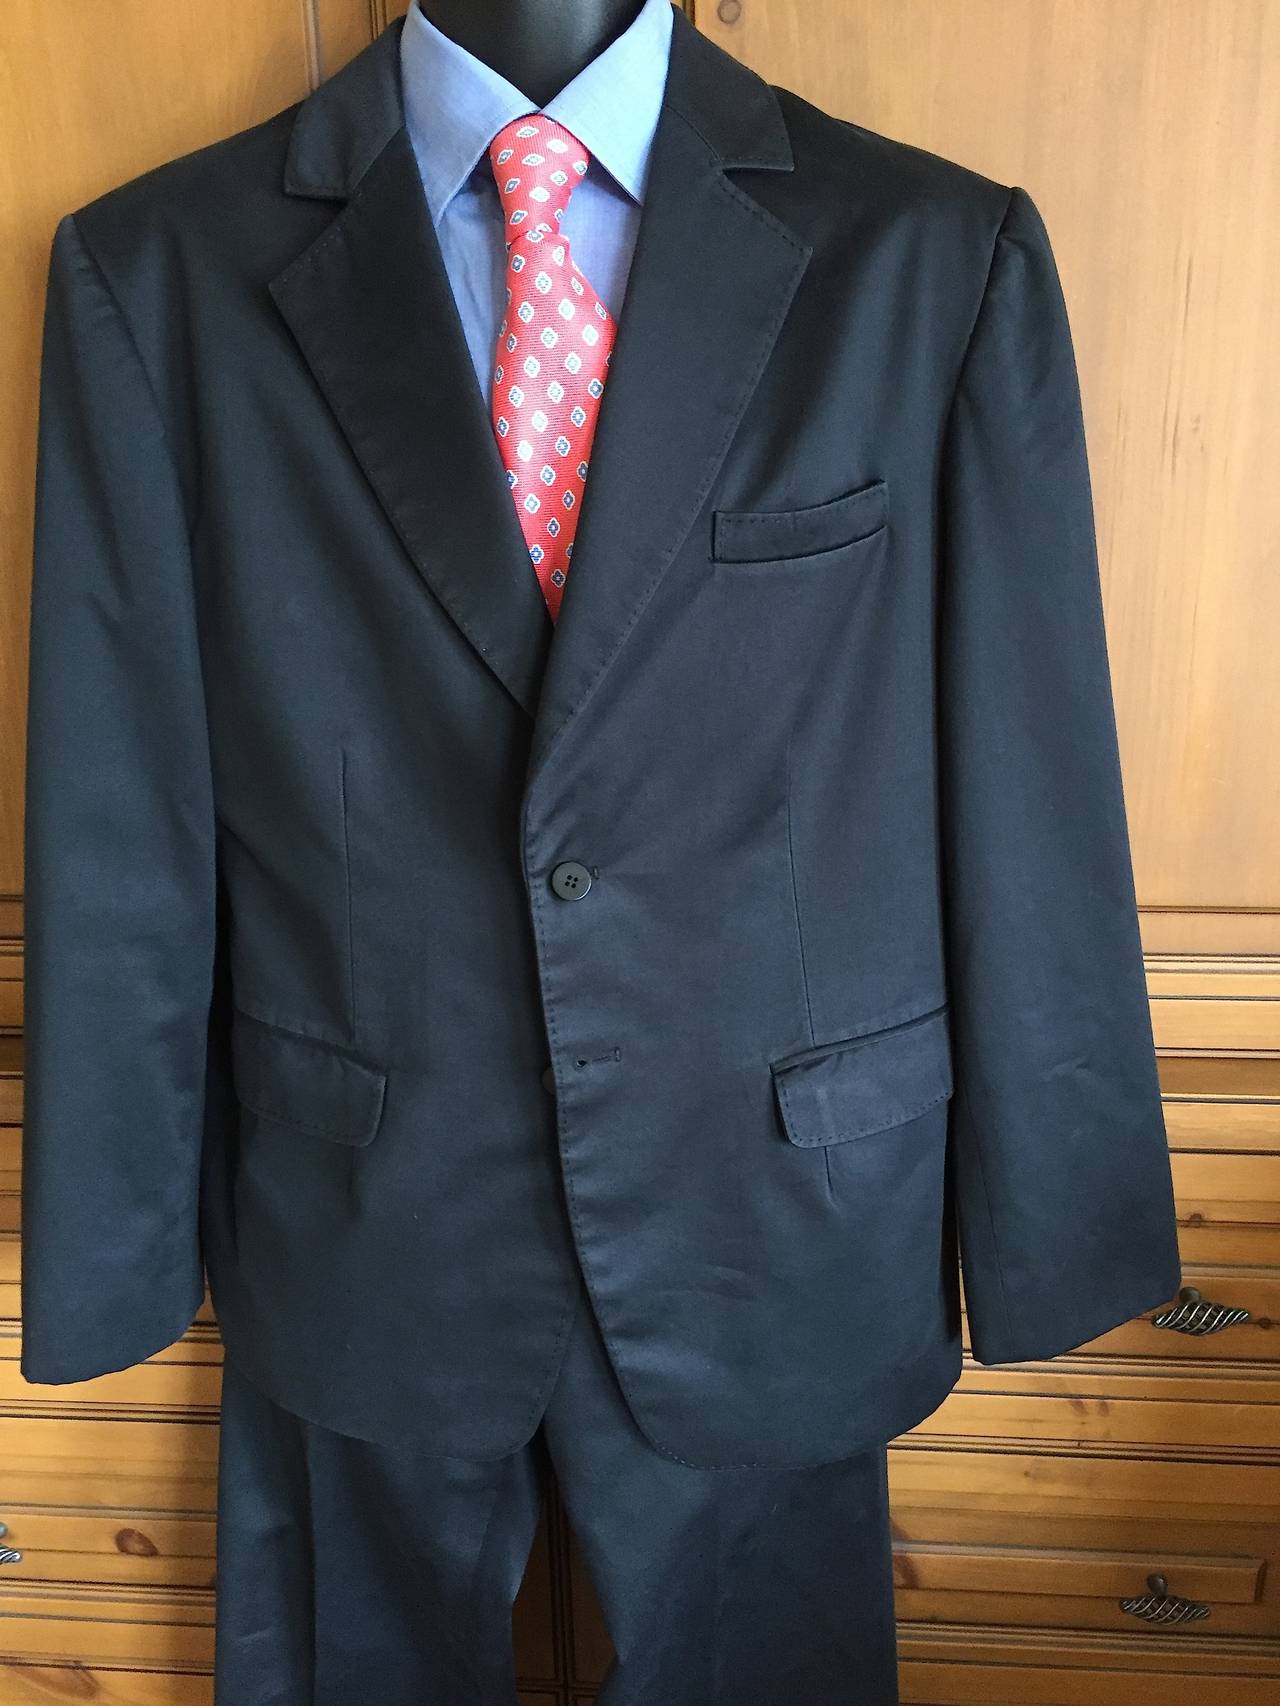 Exquisitely tailored black cotton mens suit from Chado Ralph Rucci.
Custom tailored by the Chado seamstresses who are some of the most skilled in the world.
Soft fine cotton, with the most luxurious silk lining.
Working sleeve buttons ,there are